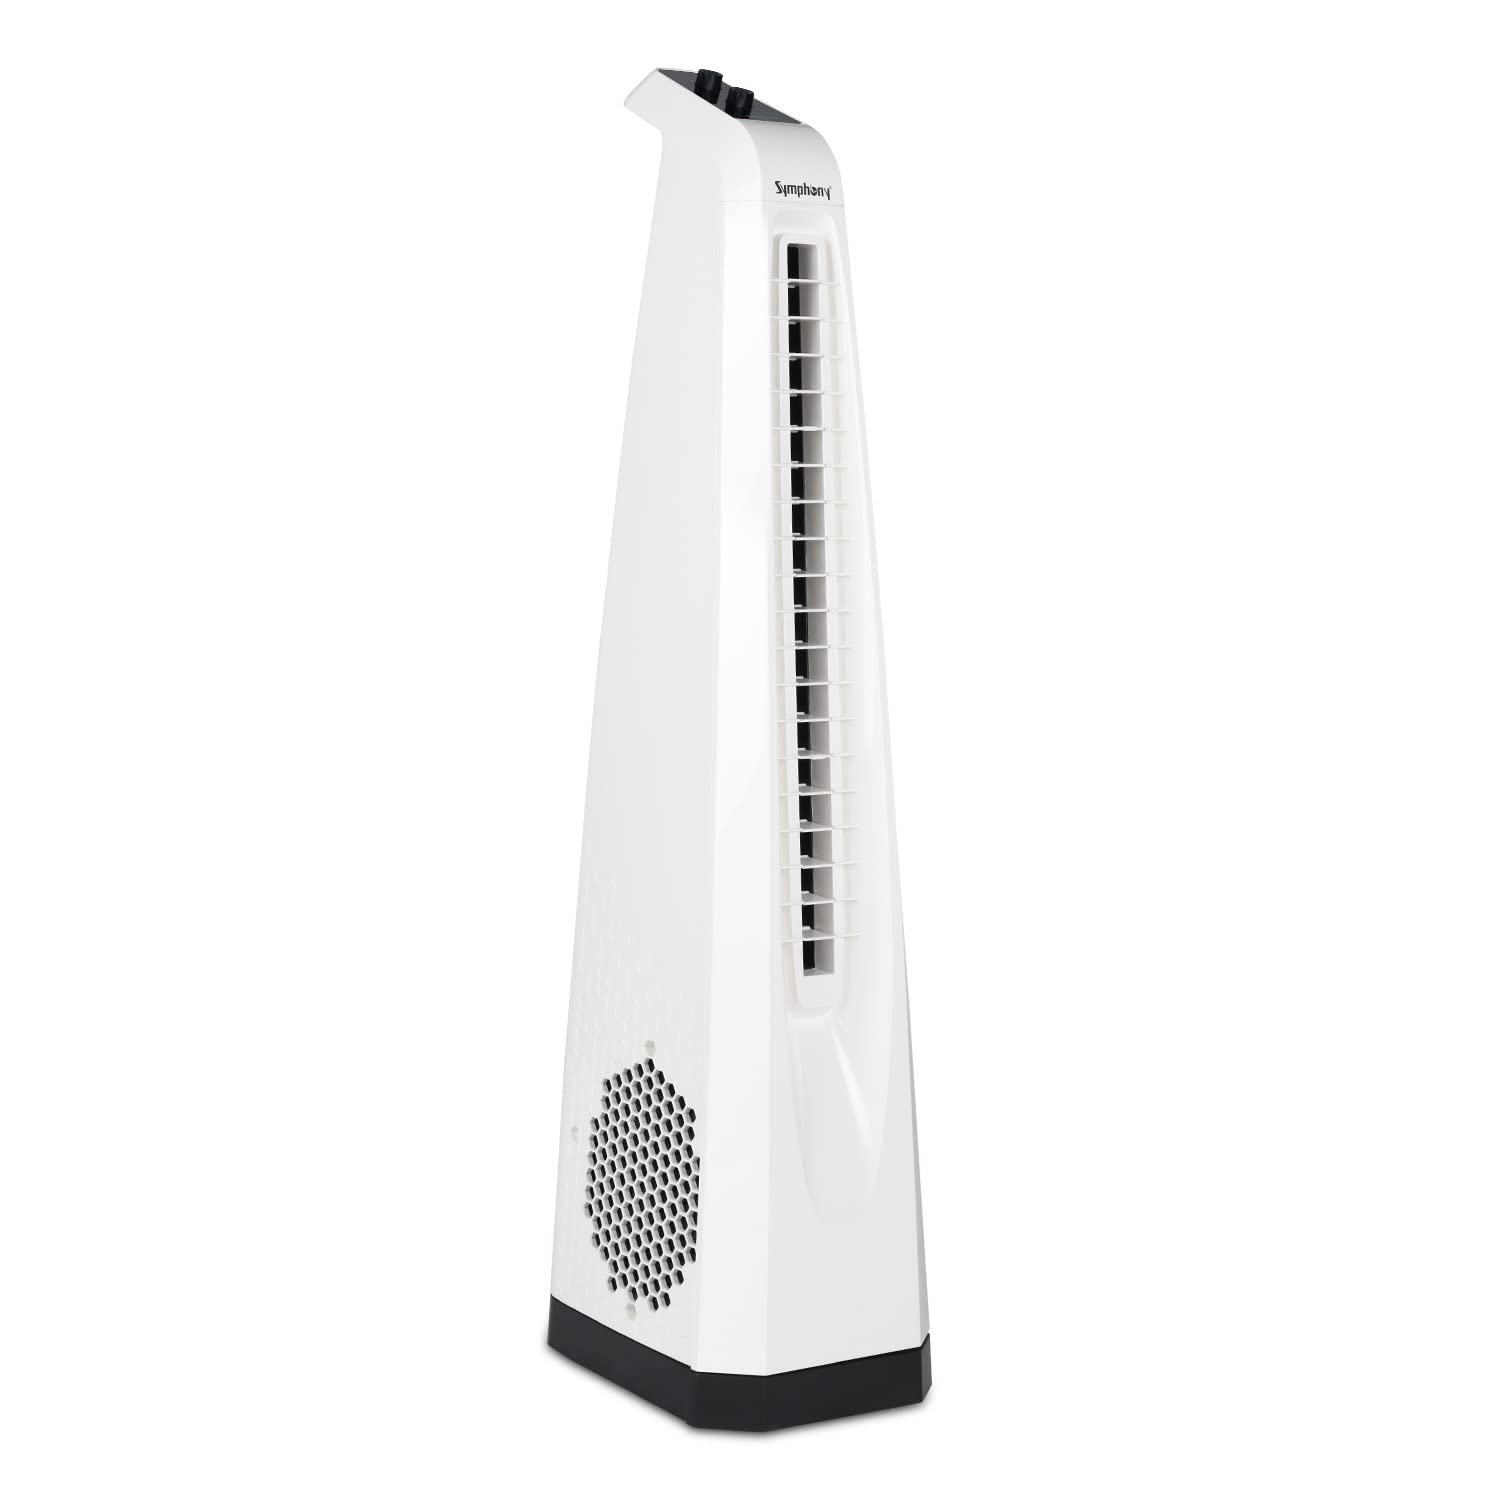 Symphony Surround High Speed Bladeless Technology Tower Fan for Home With Swivel Action, Dust Filter, and Low Power Consumption (White)